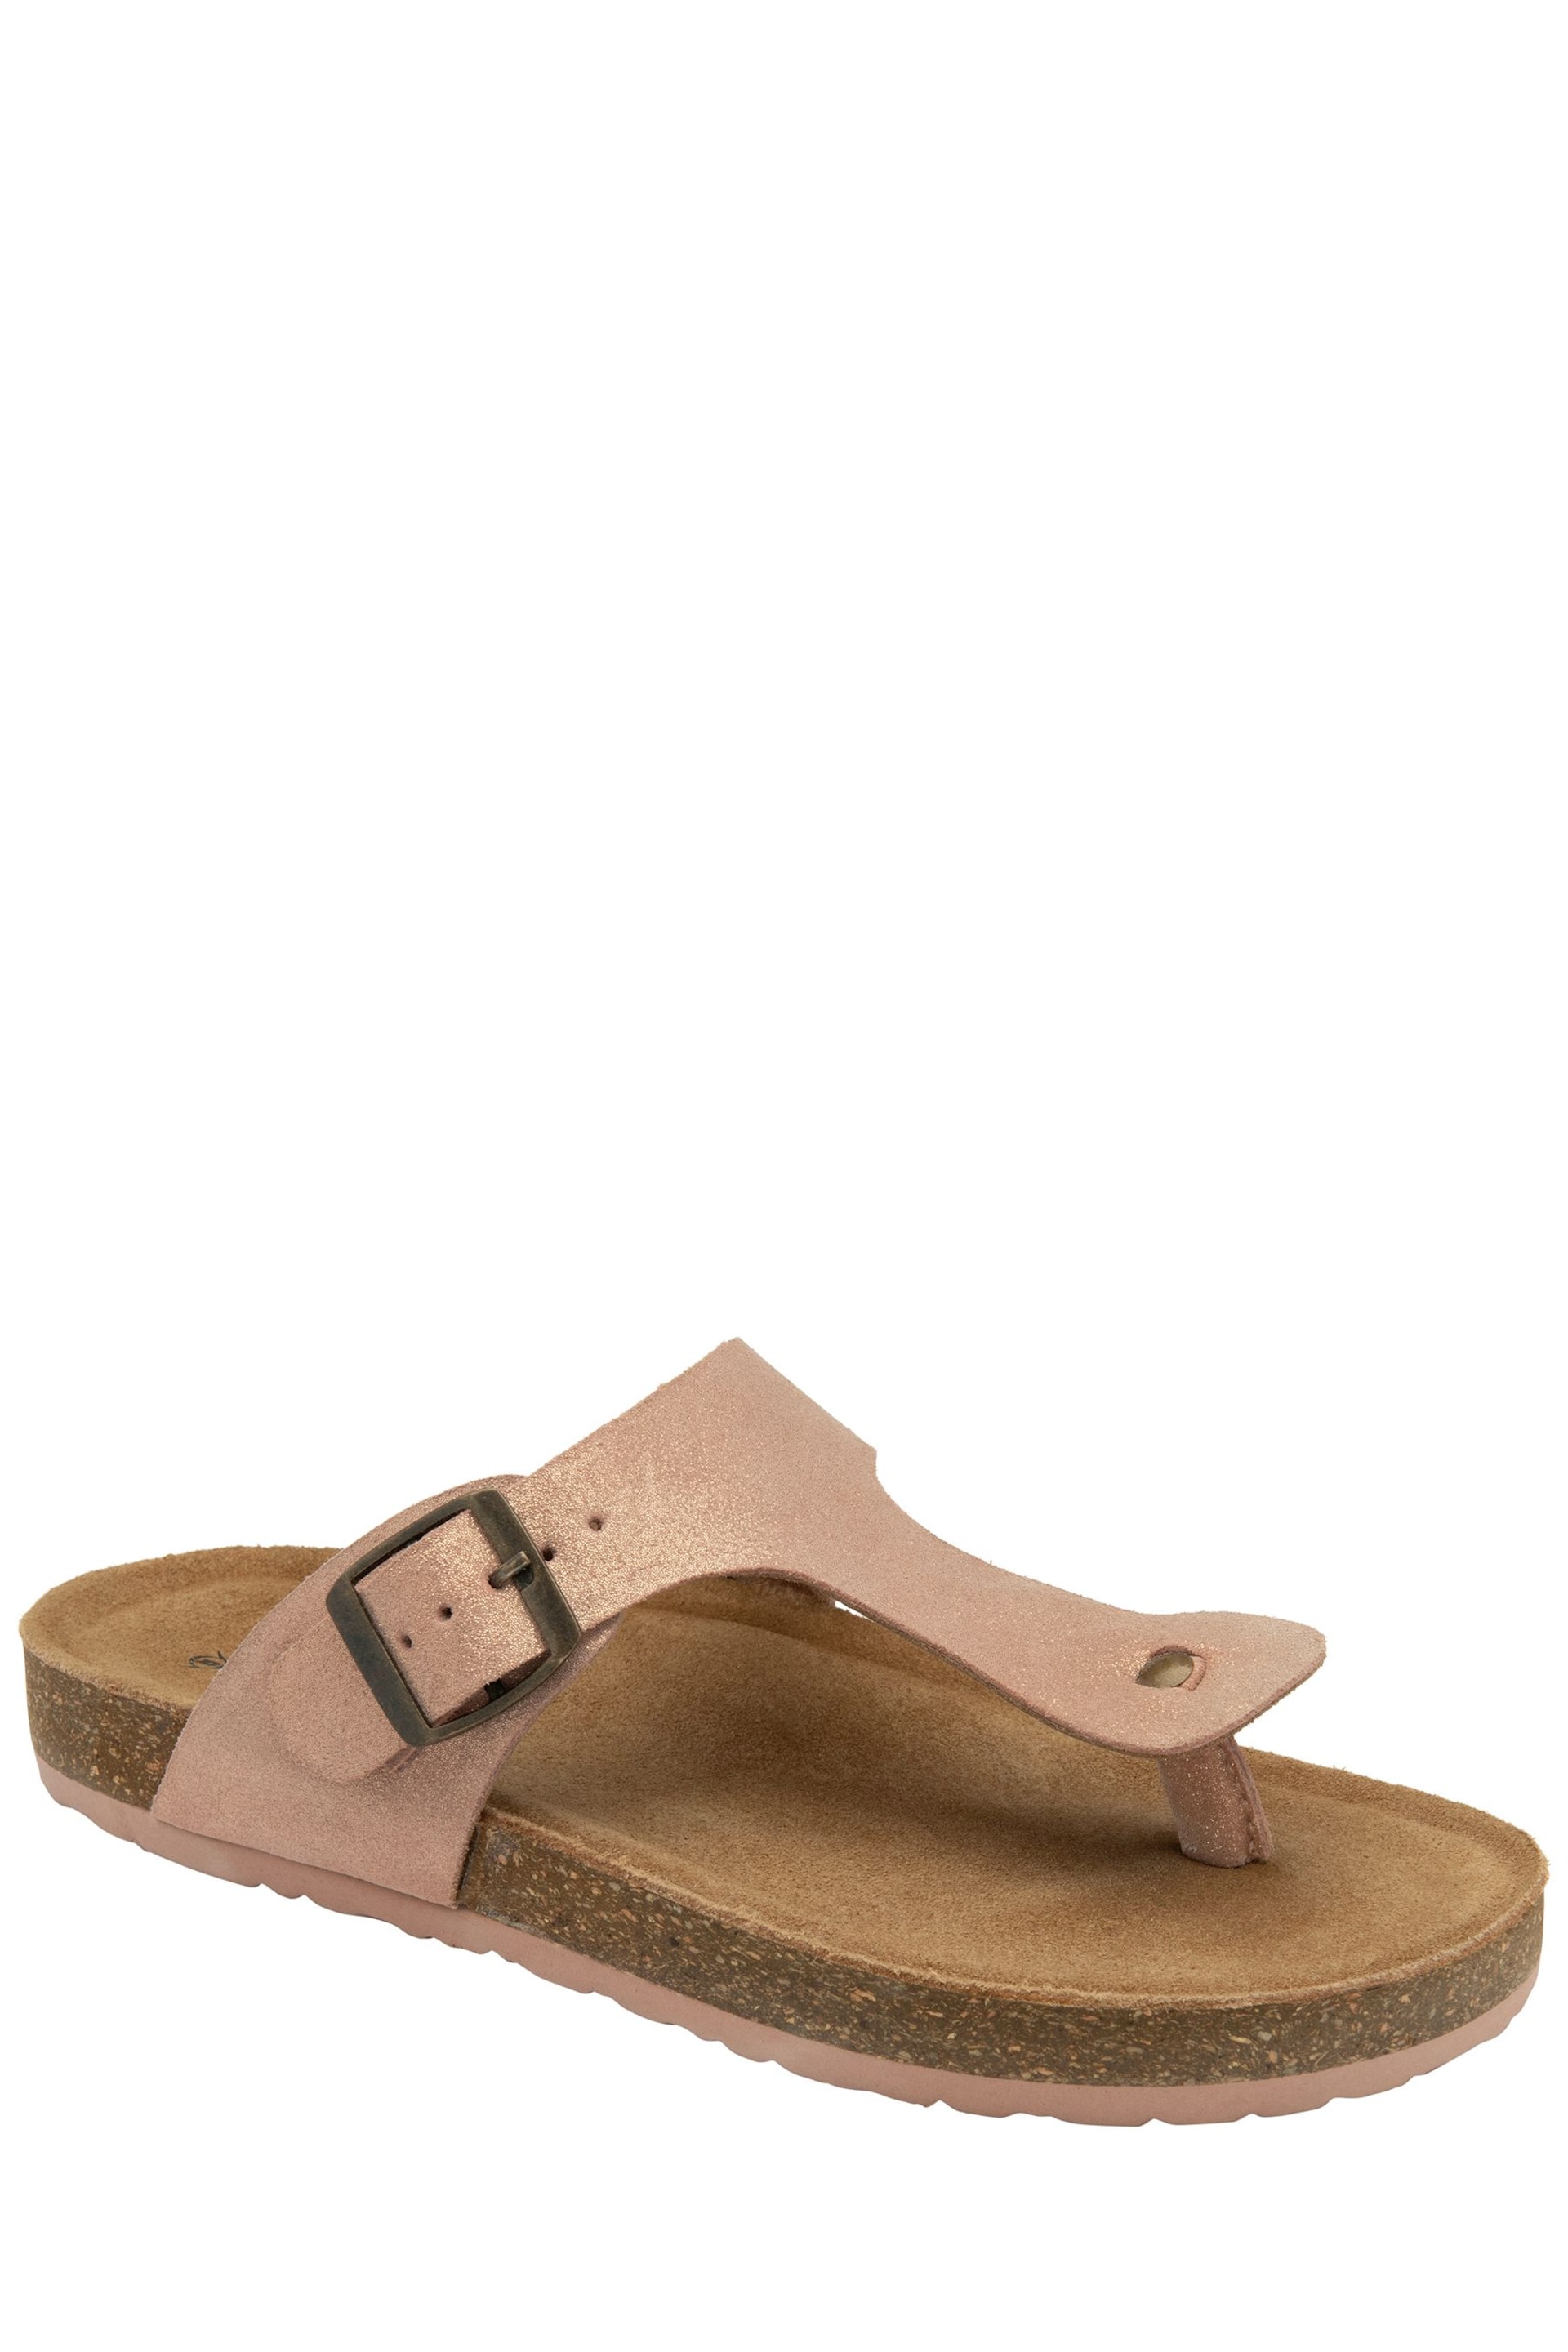 Dunlop Gold Ladies Toe Post Footbed Sandals - Image 1 of 4